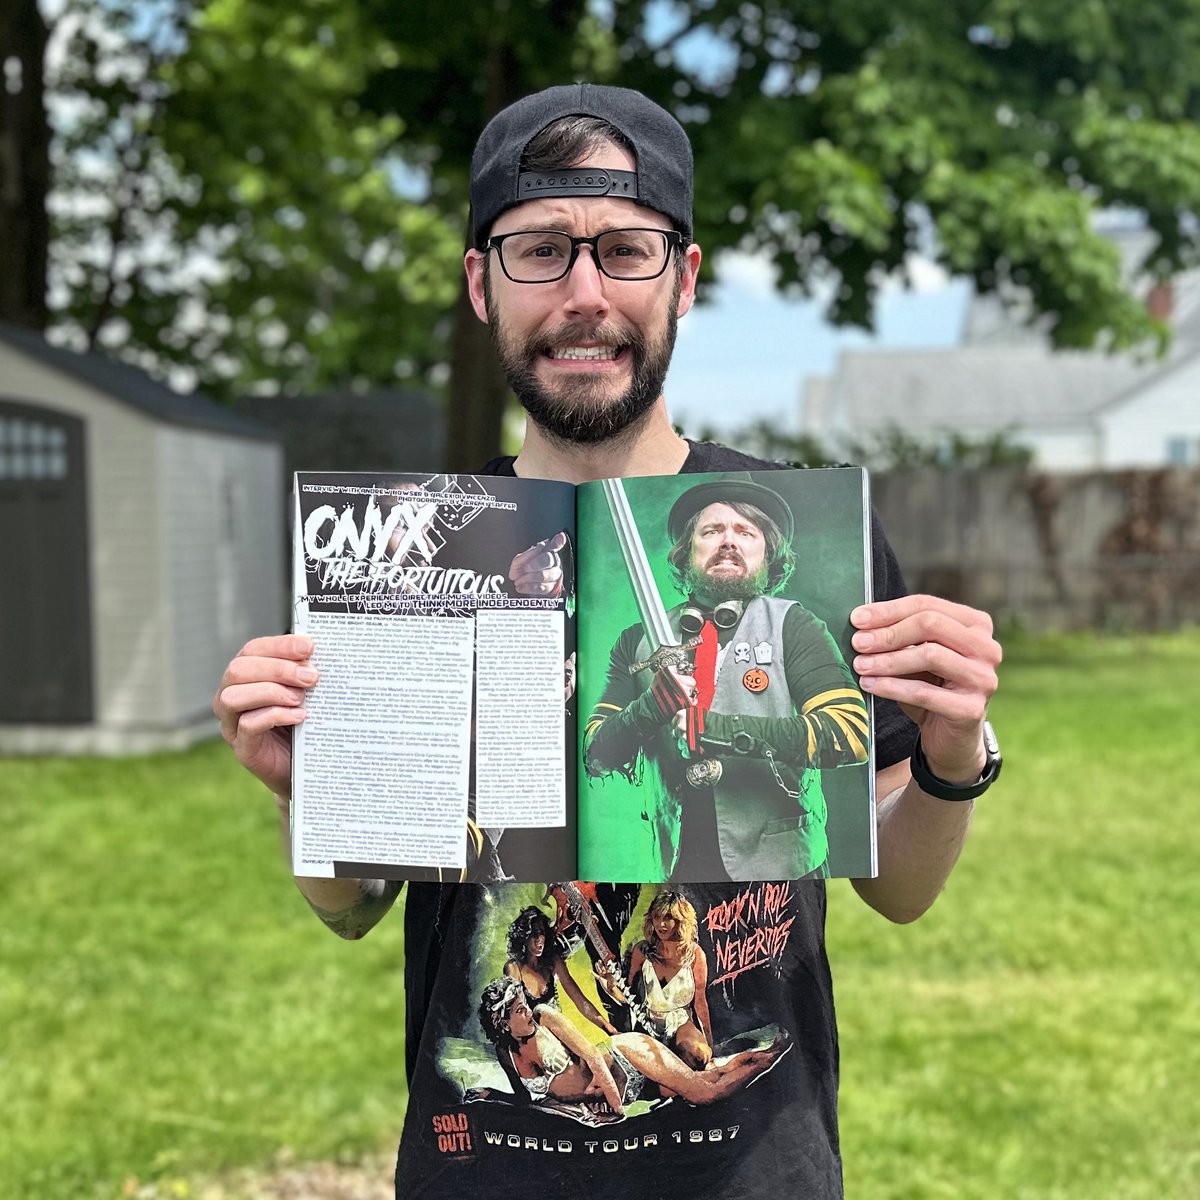 Internet is life, but it's always a thrill to see my work in print. Check out my feature on Onyx the Fortuitous himself, @andrewbowser, alongside @jeremysaffer's photos in the new issue of @outburnmag!